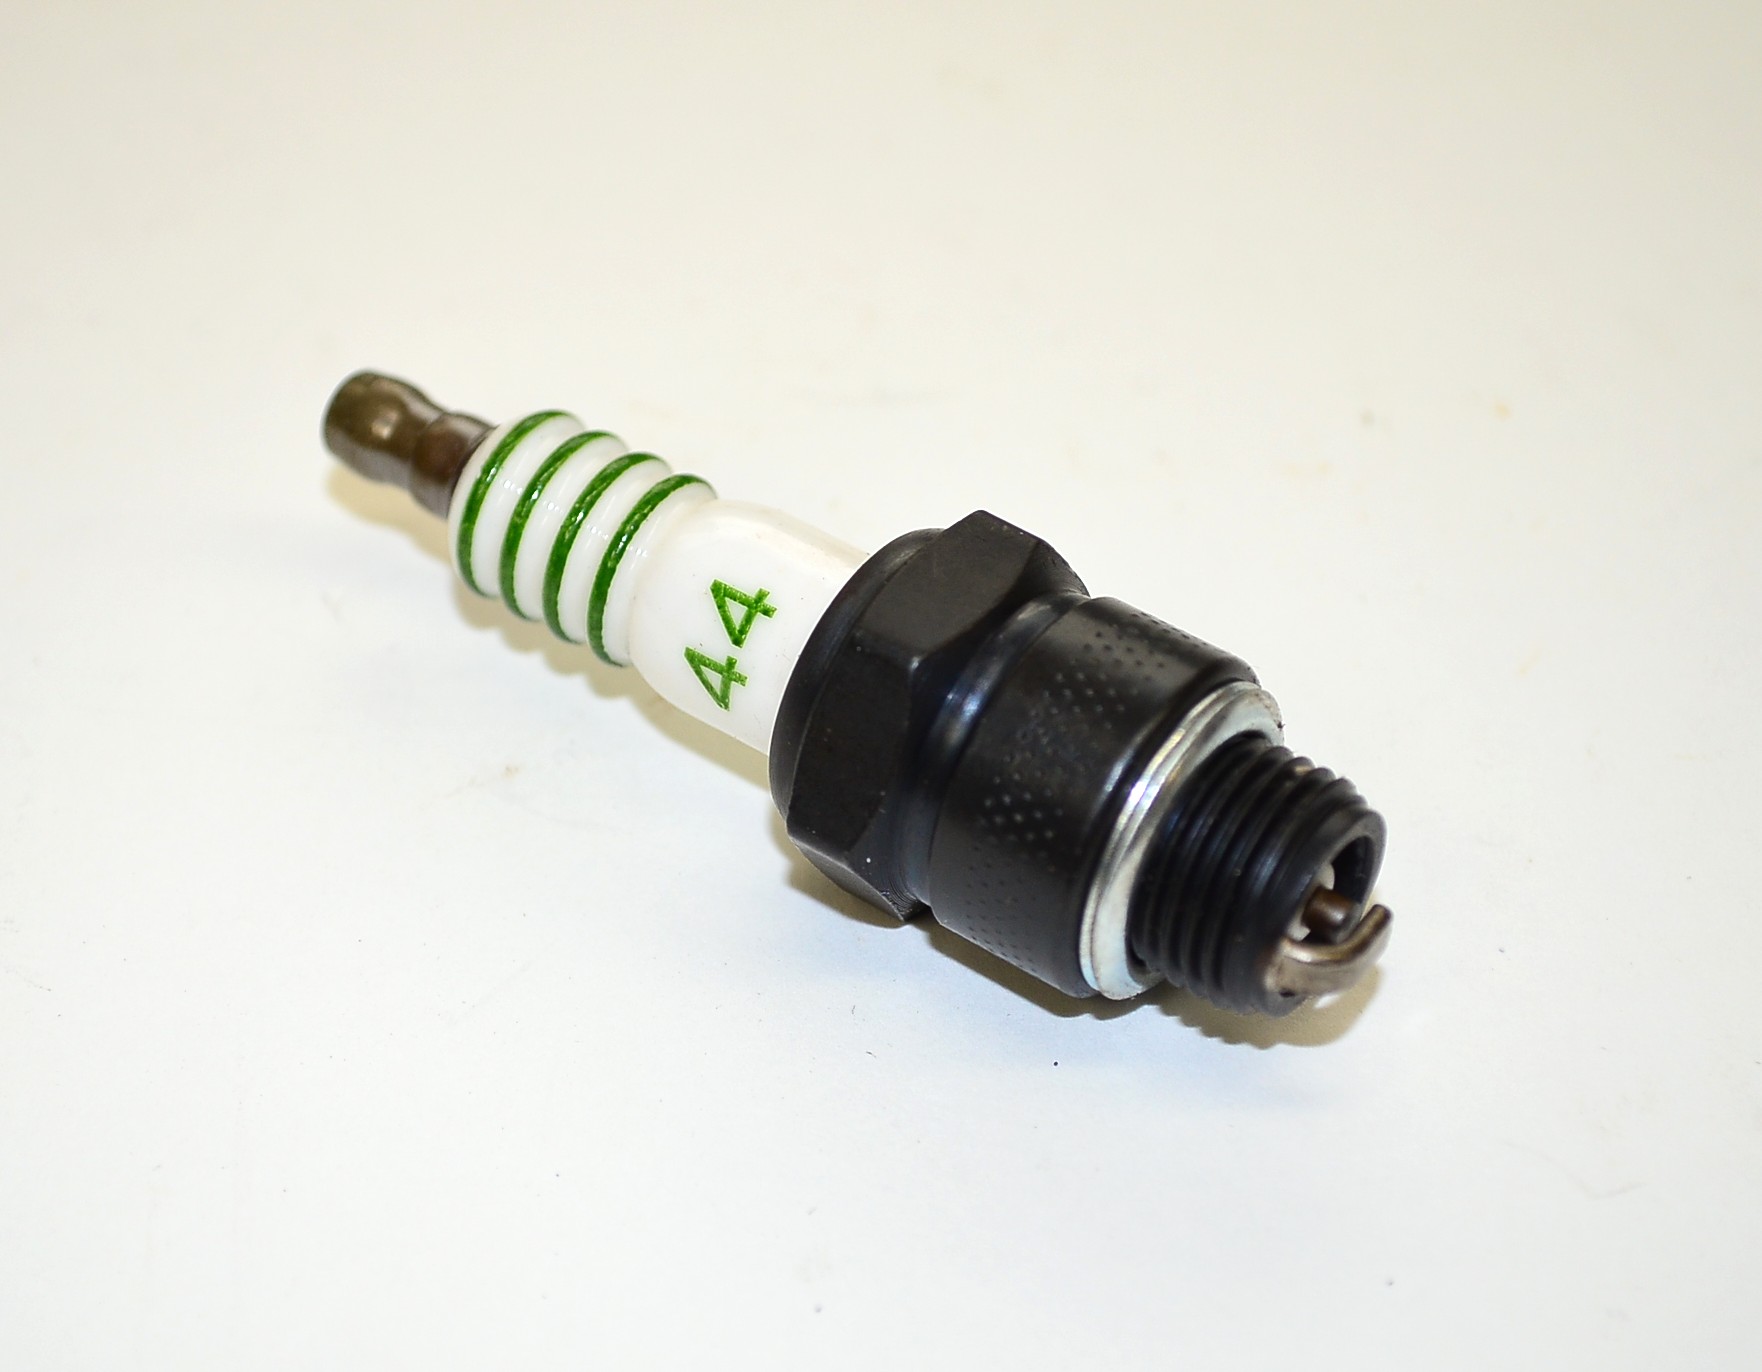 AC DELCO Spark Plugs Green Stripe 44 Keen Parts News